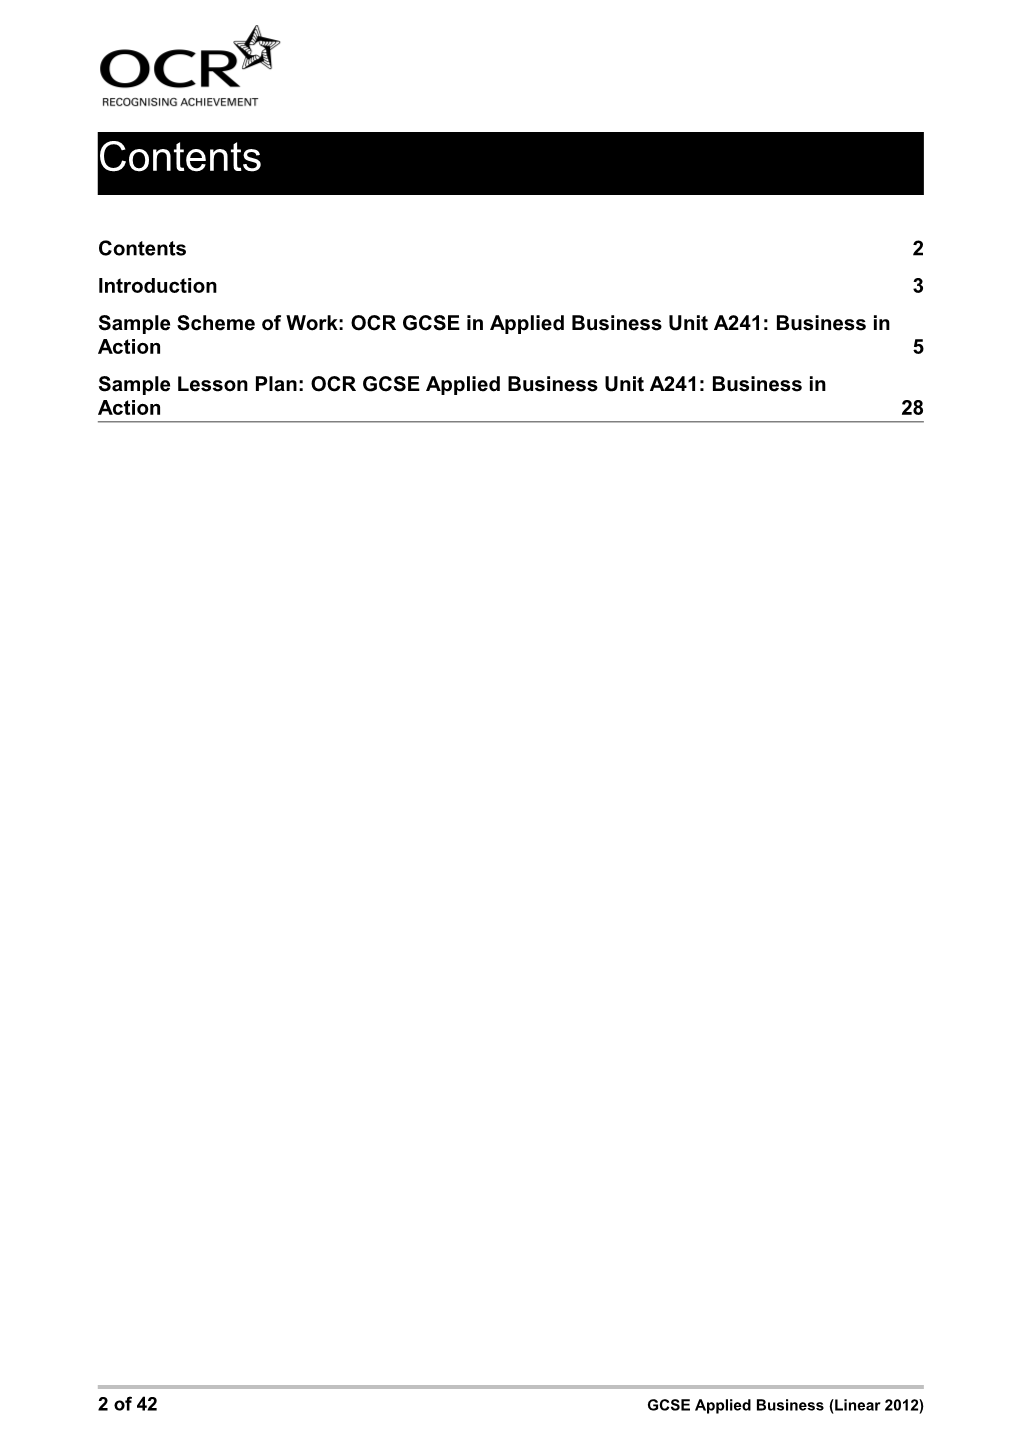 Sample Scheme of Work: OCR GCSE in Applied Business Unit A241: Business in Action